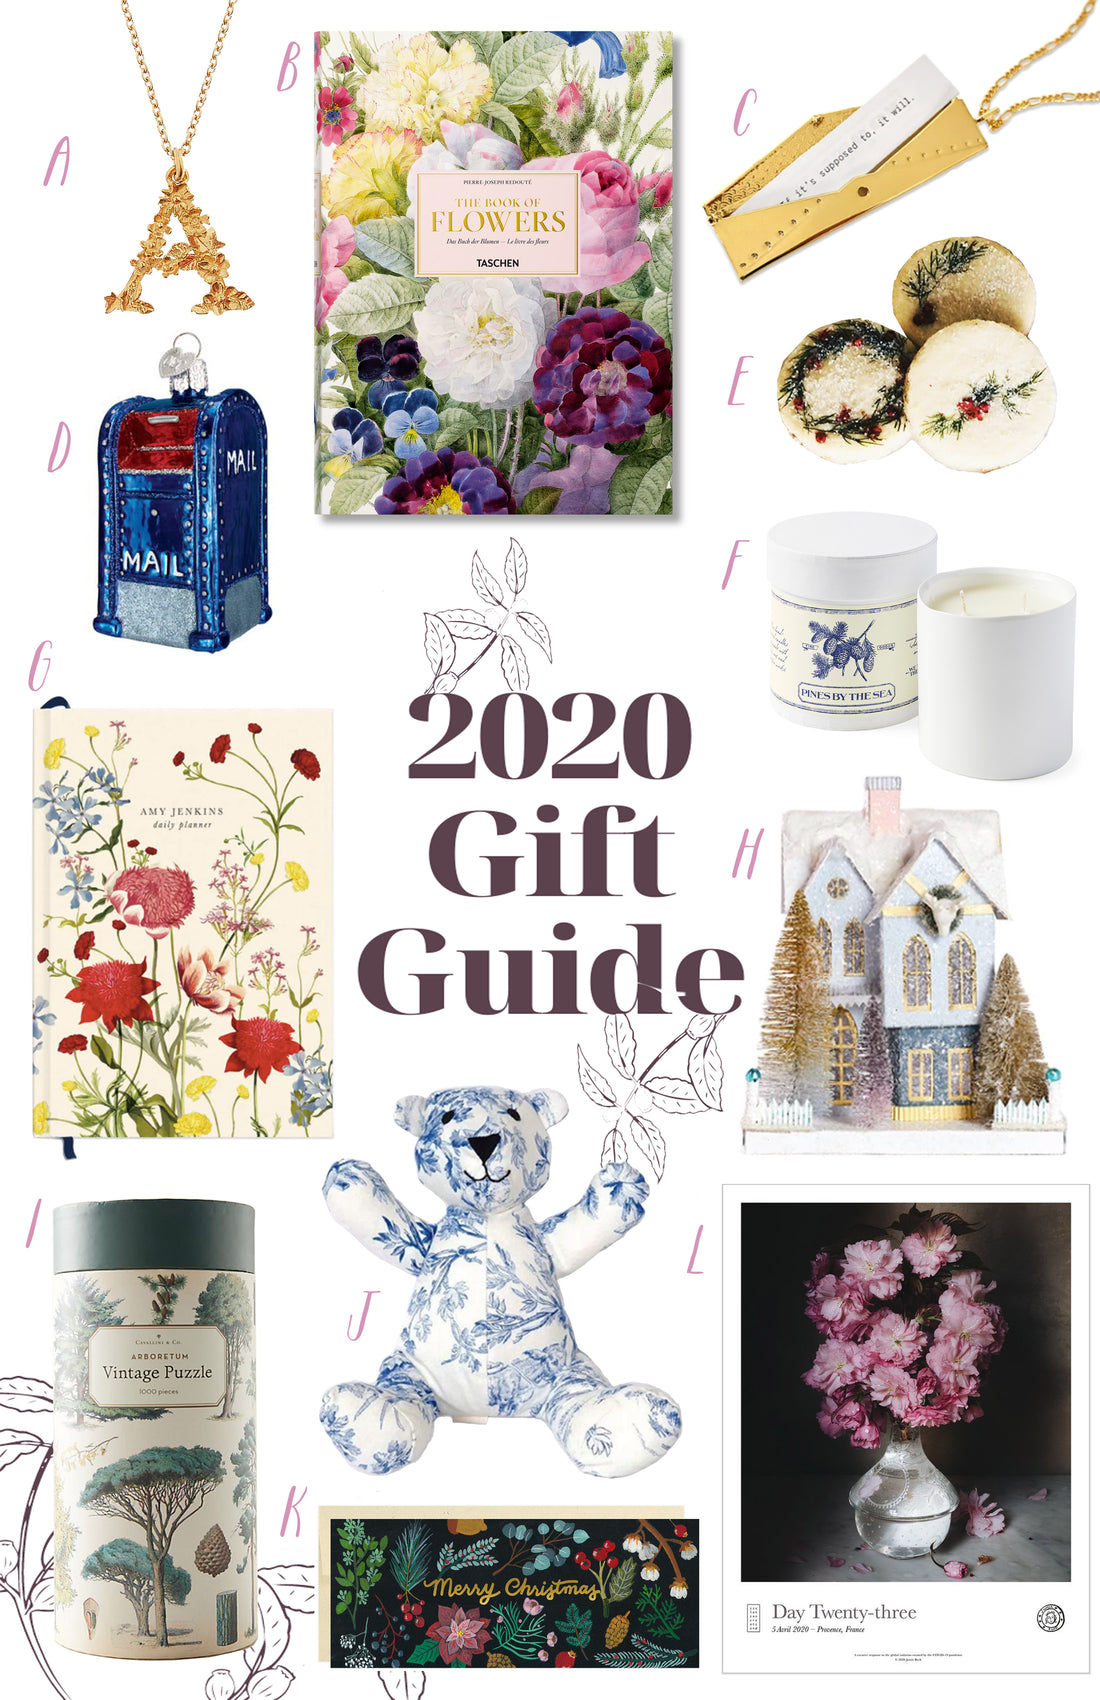 Forage's 2020 Gift Guide